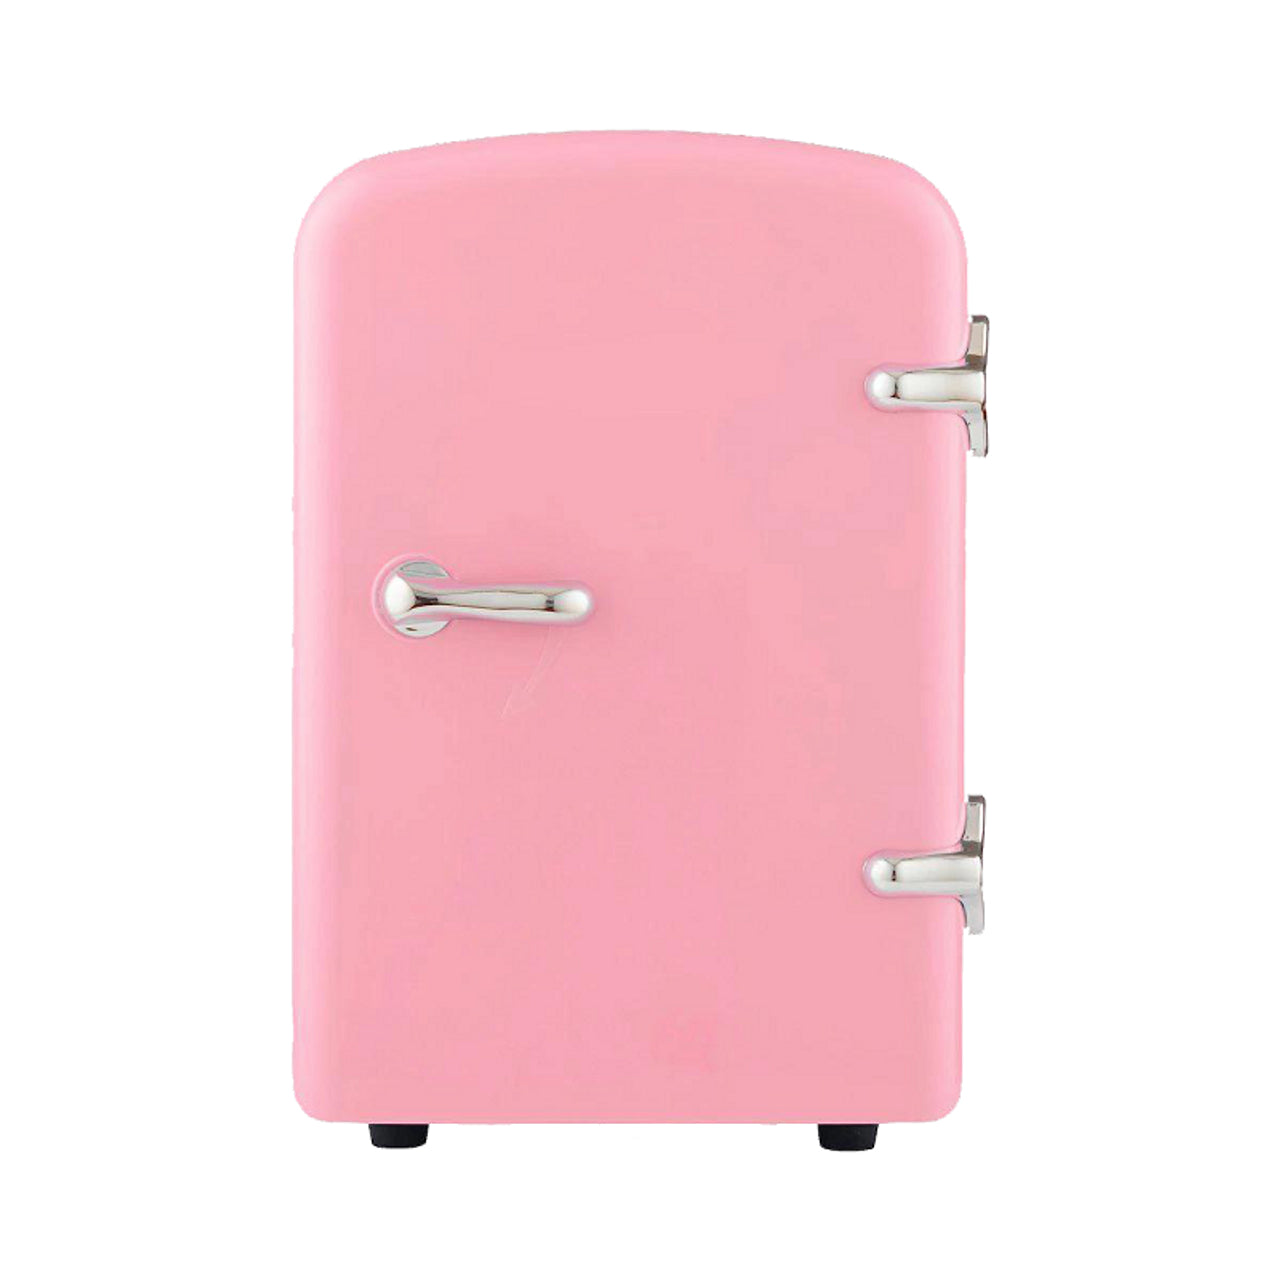 MINI REFRIGERATOR S15 FOR SKIN CARE PRODUCTS